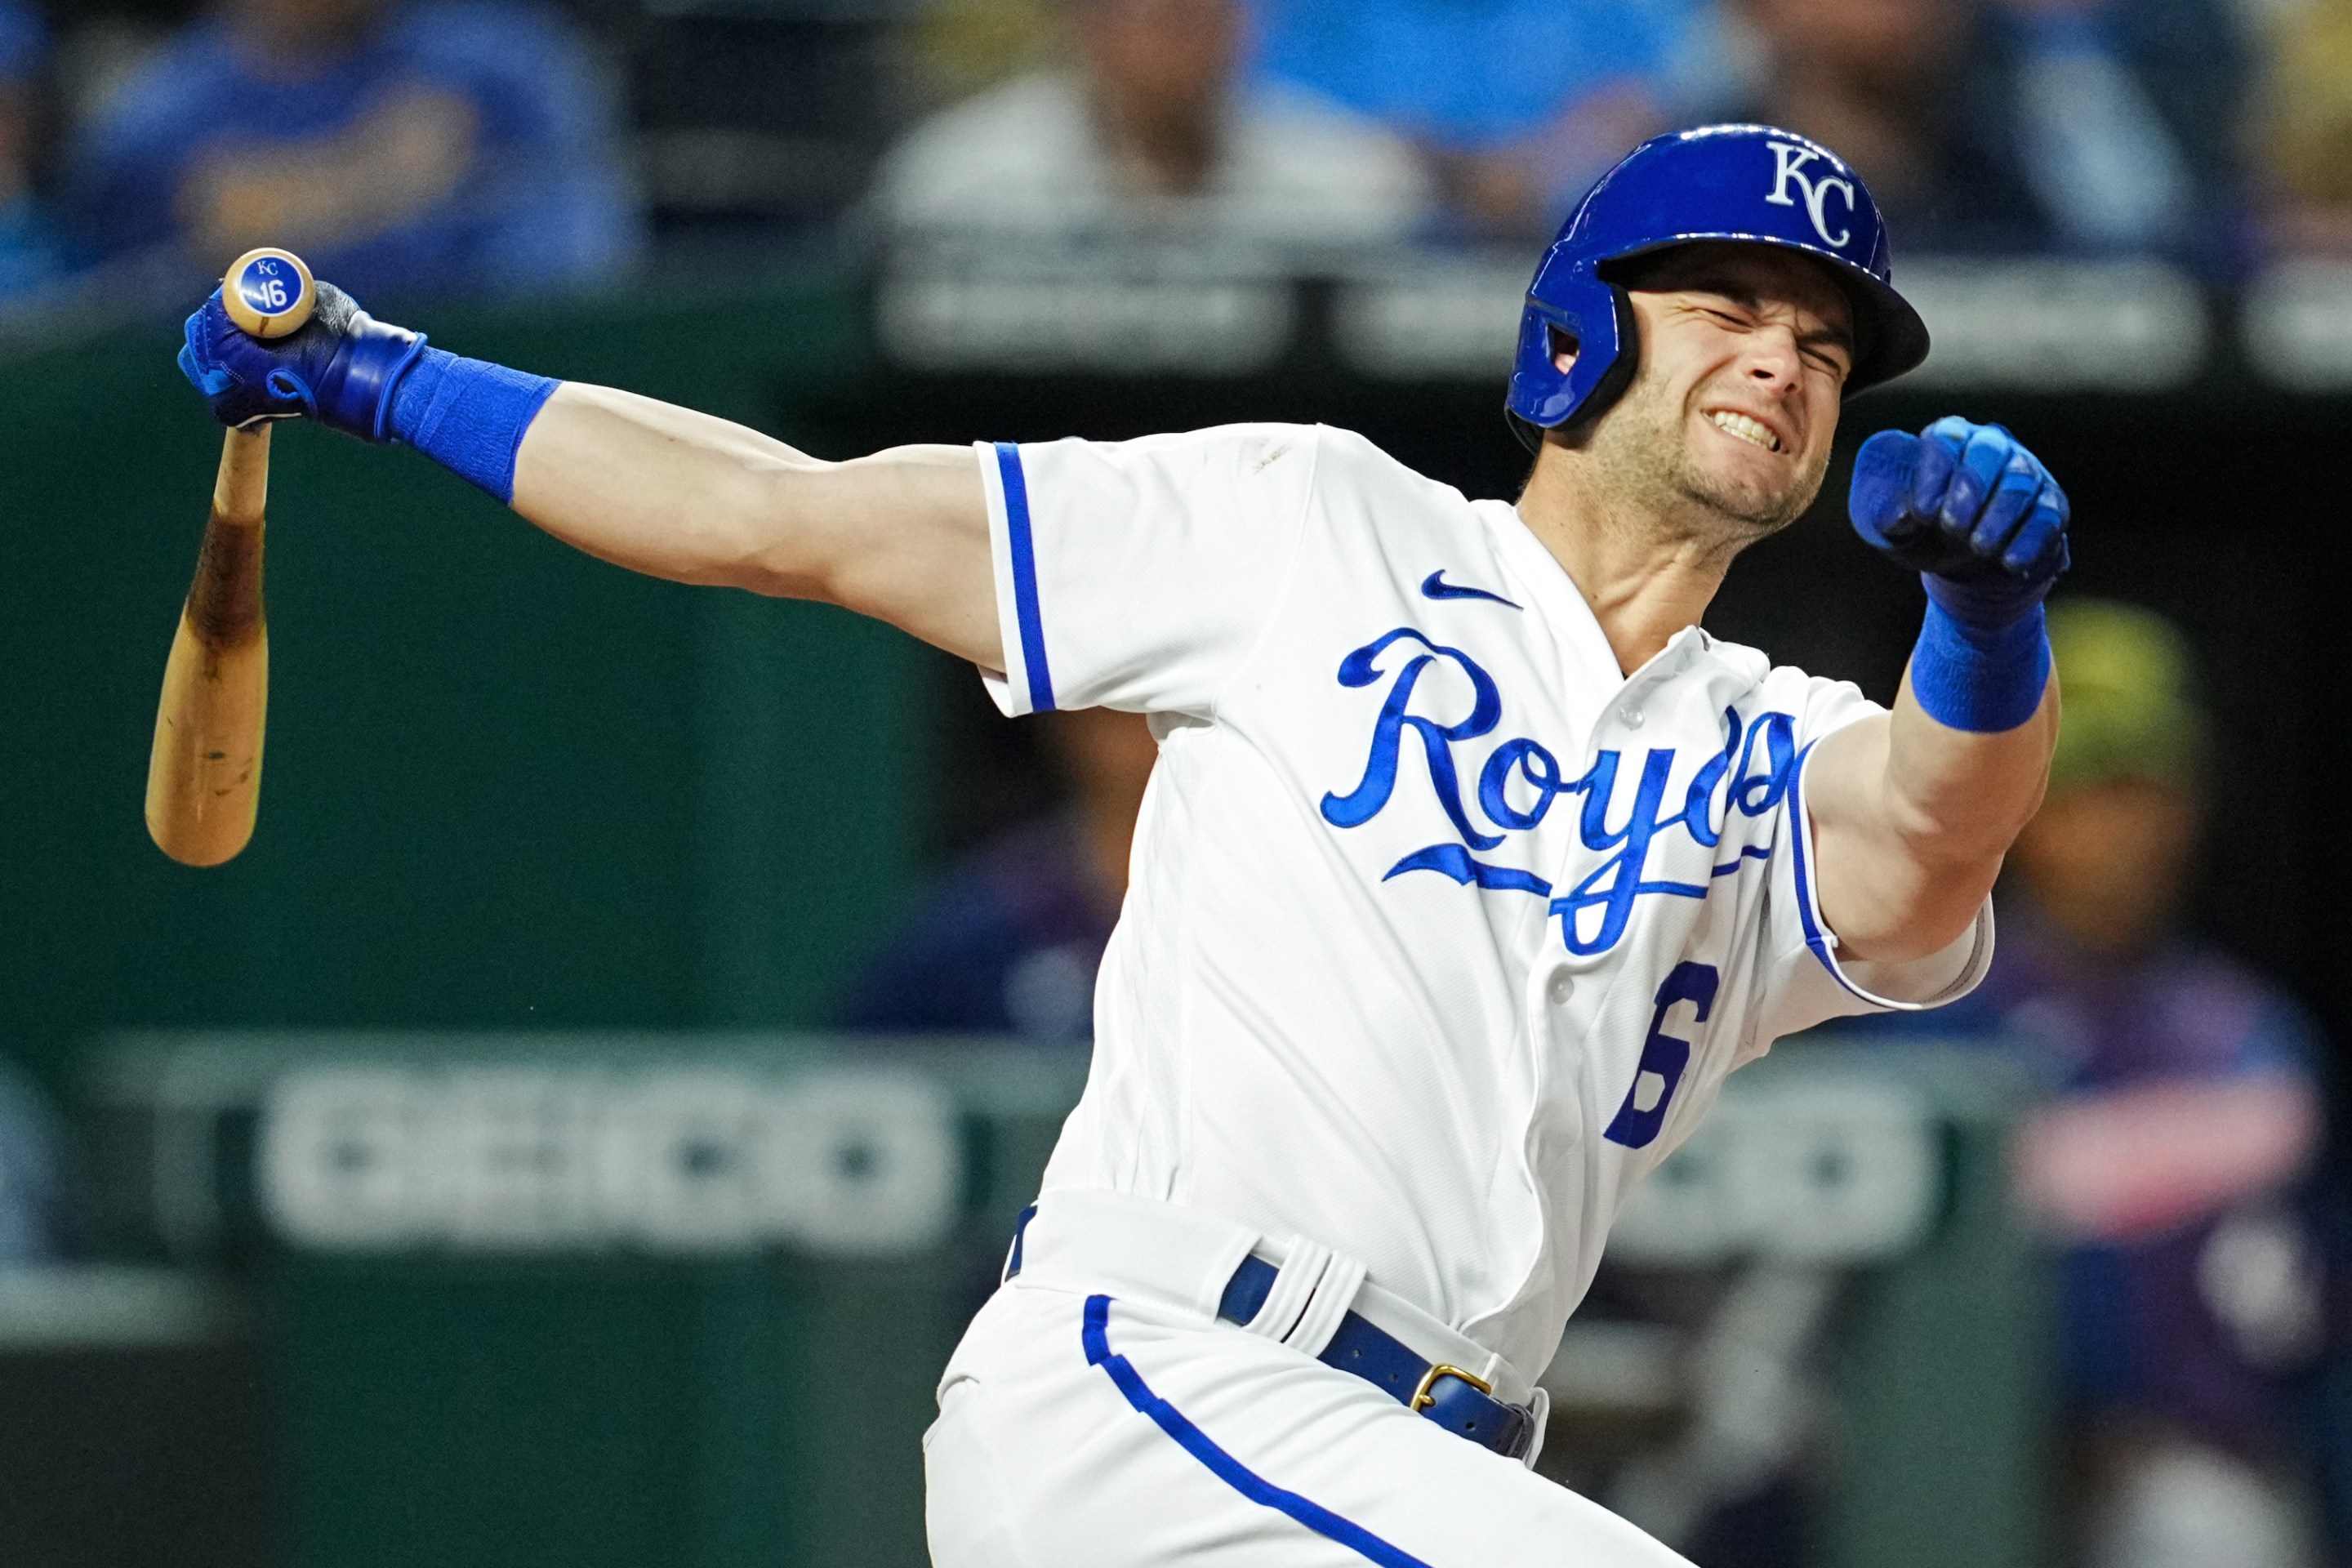 Andrew Benintendi #16 of the Kansas City Royals reacts after fouling a ball off of his leg during the seventh inning against the Minnesota Twins at Kauffman Stadium on May 20, 2022 in Kansas City, Missouri.